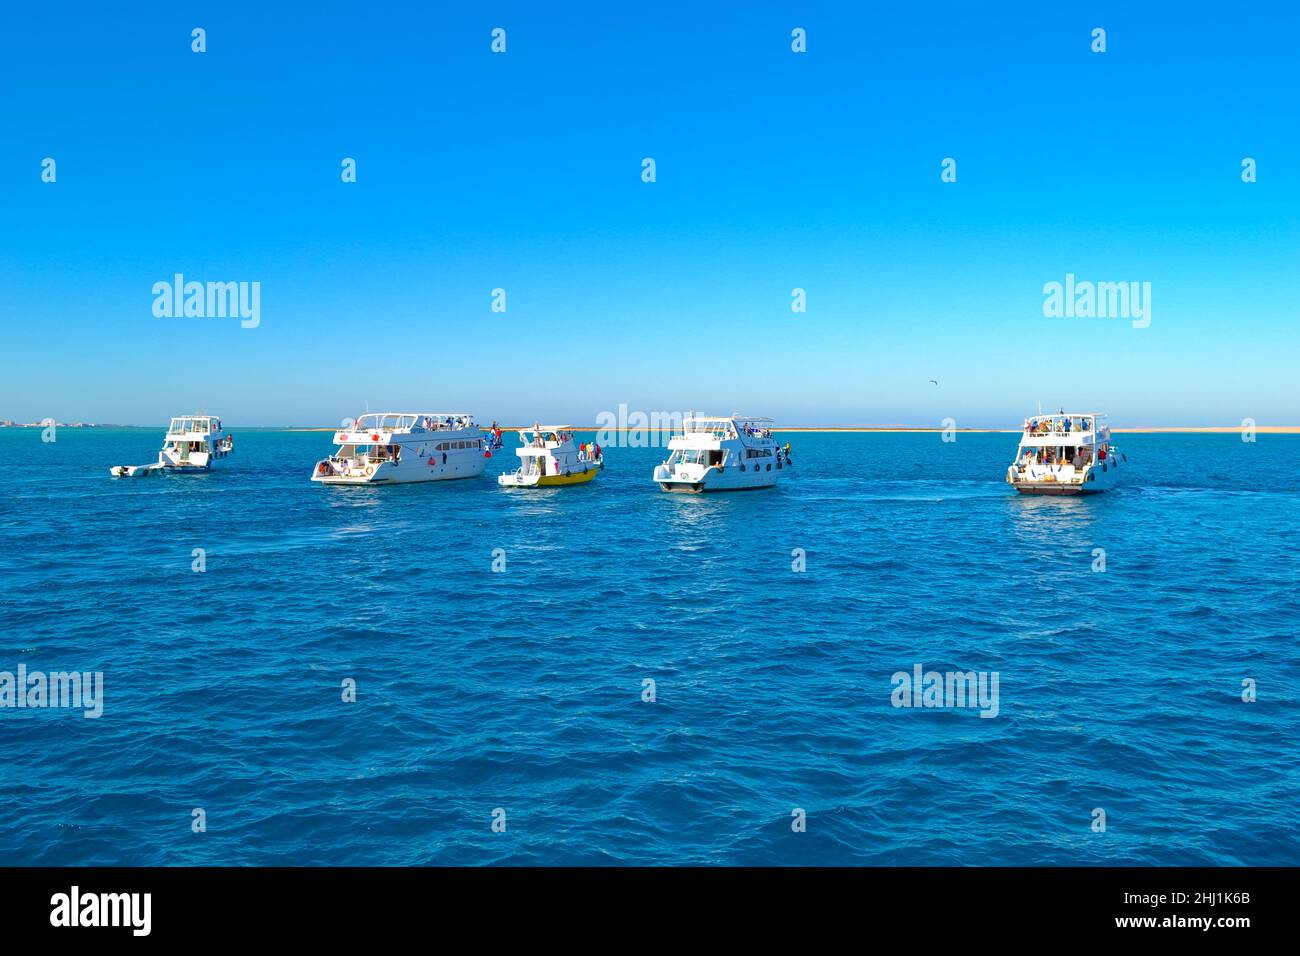 A lot of white yachts with tourists on board against a background of blue sky and bright blue sea, Red Sea, Egypt Stock Photo